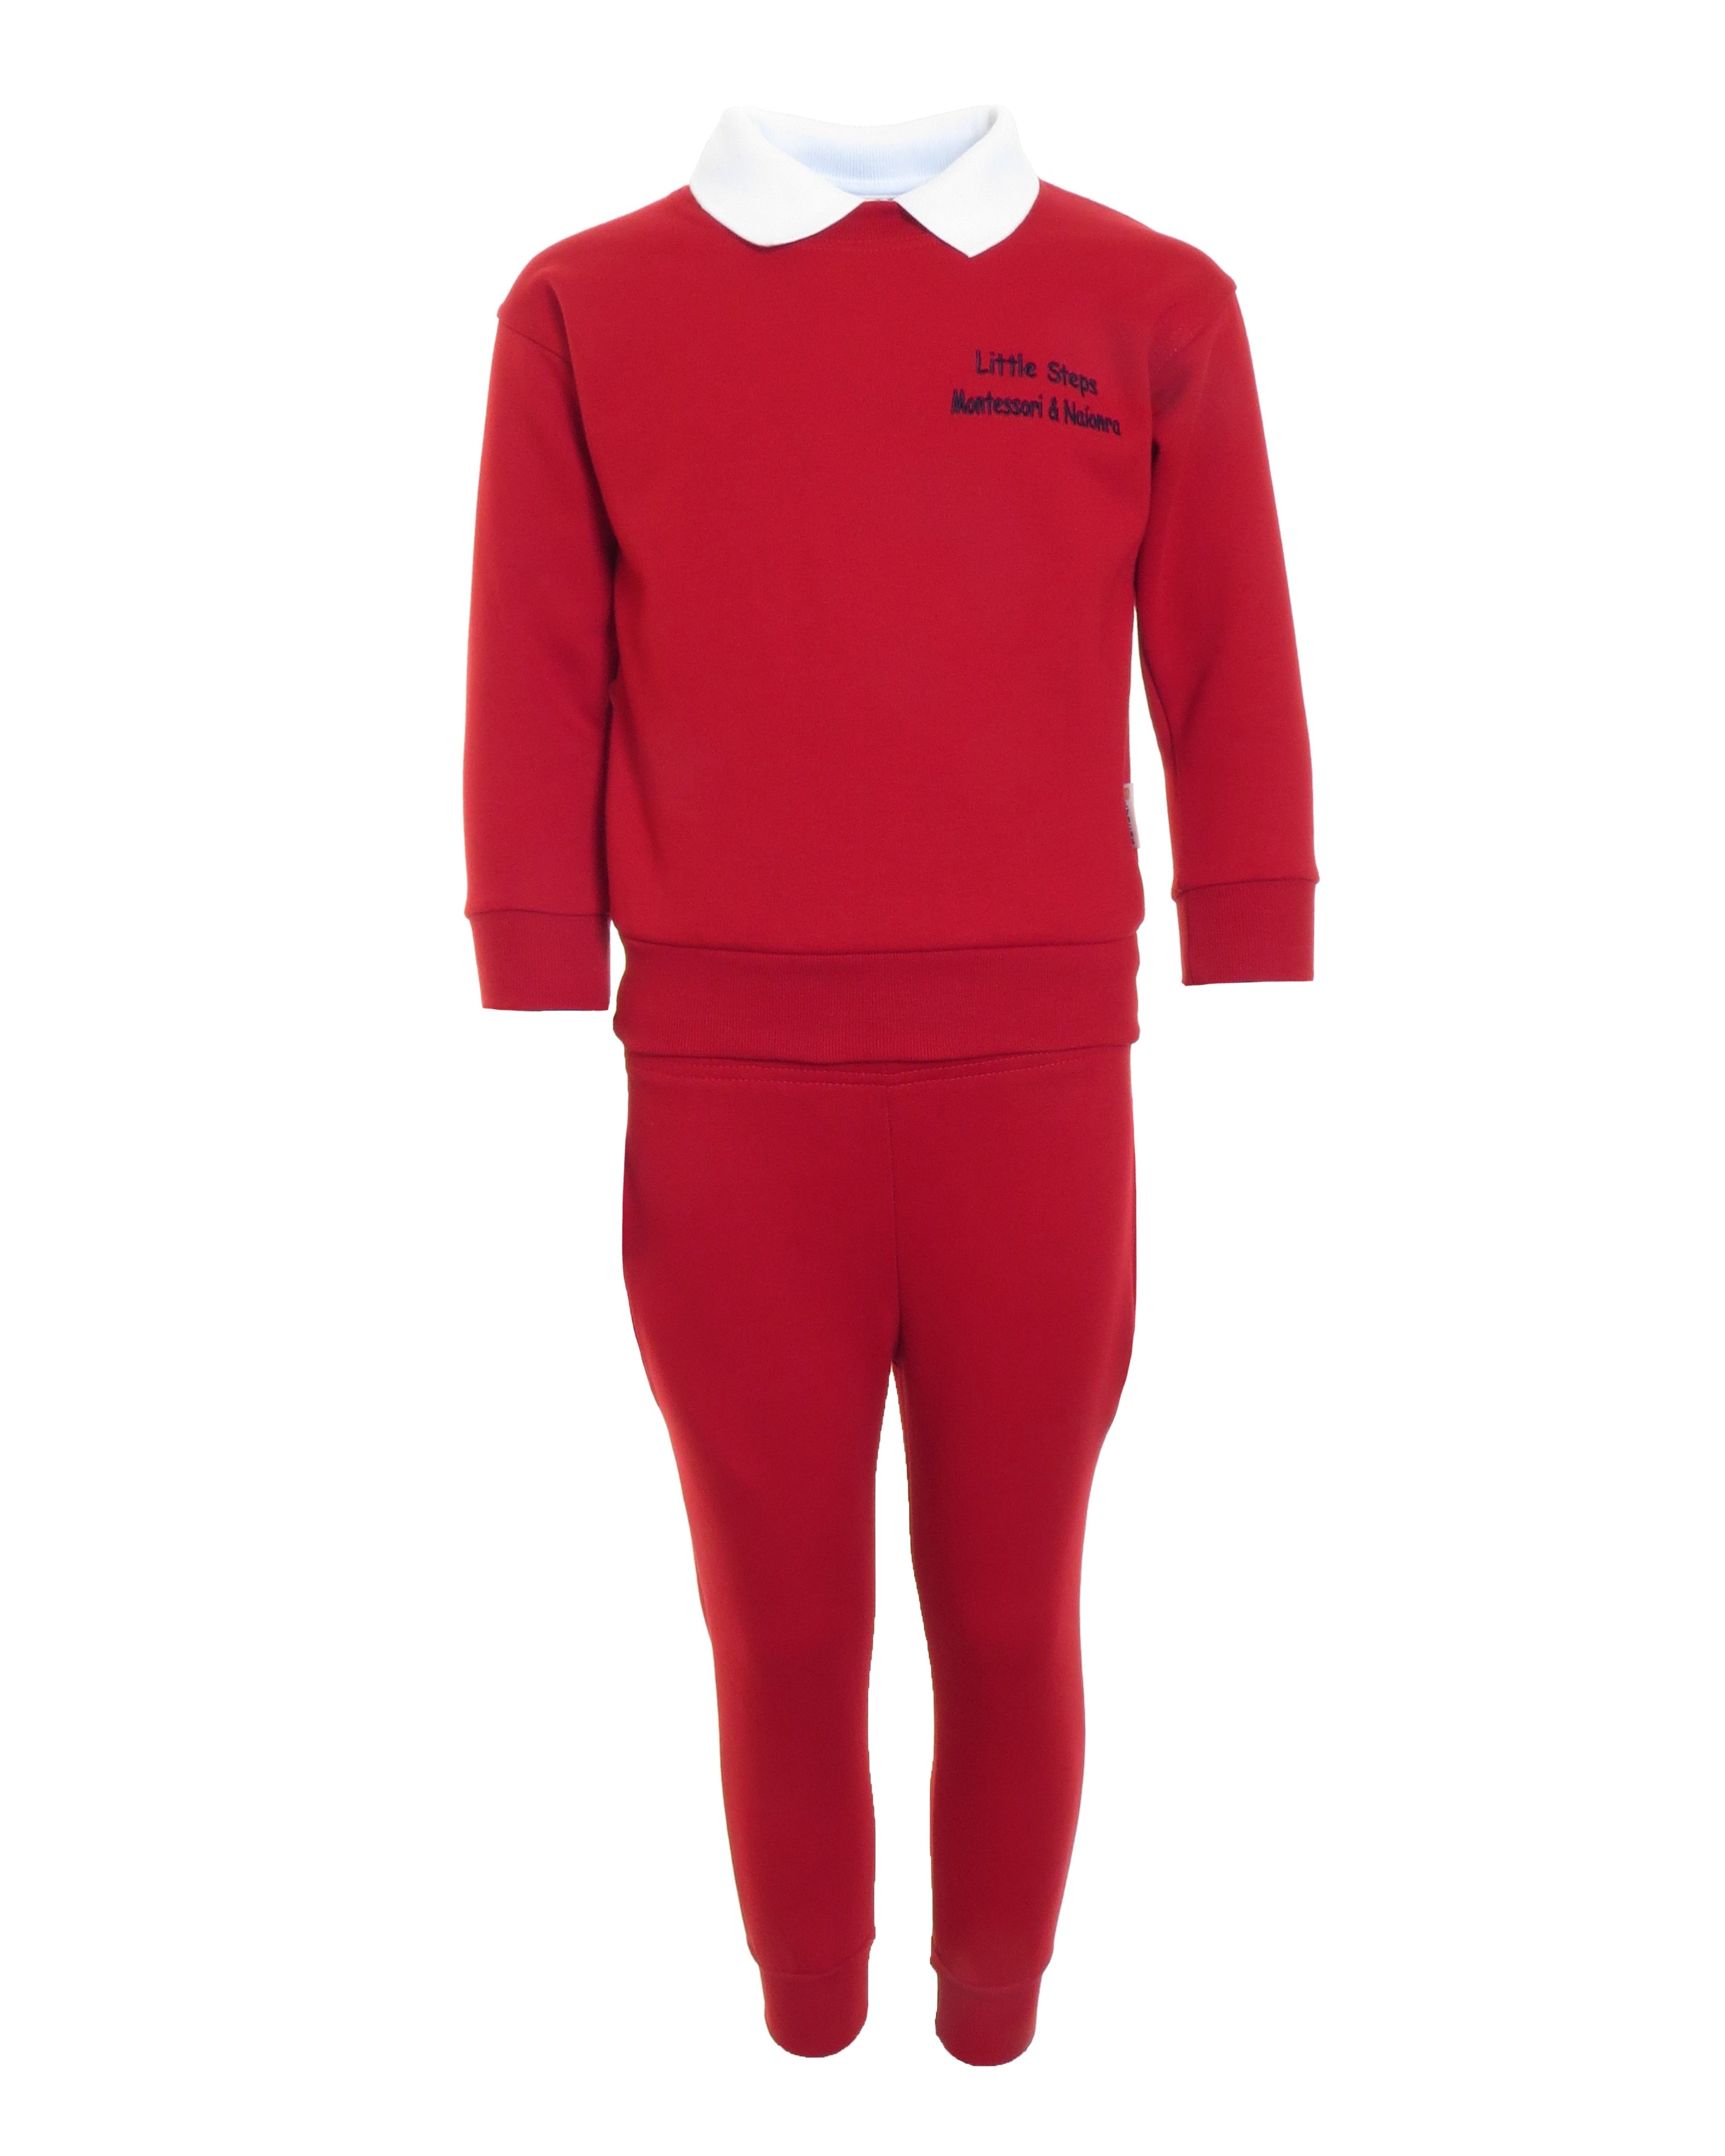 Little Steps Red Tracksuit